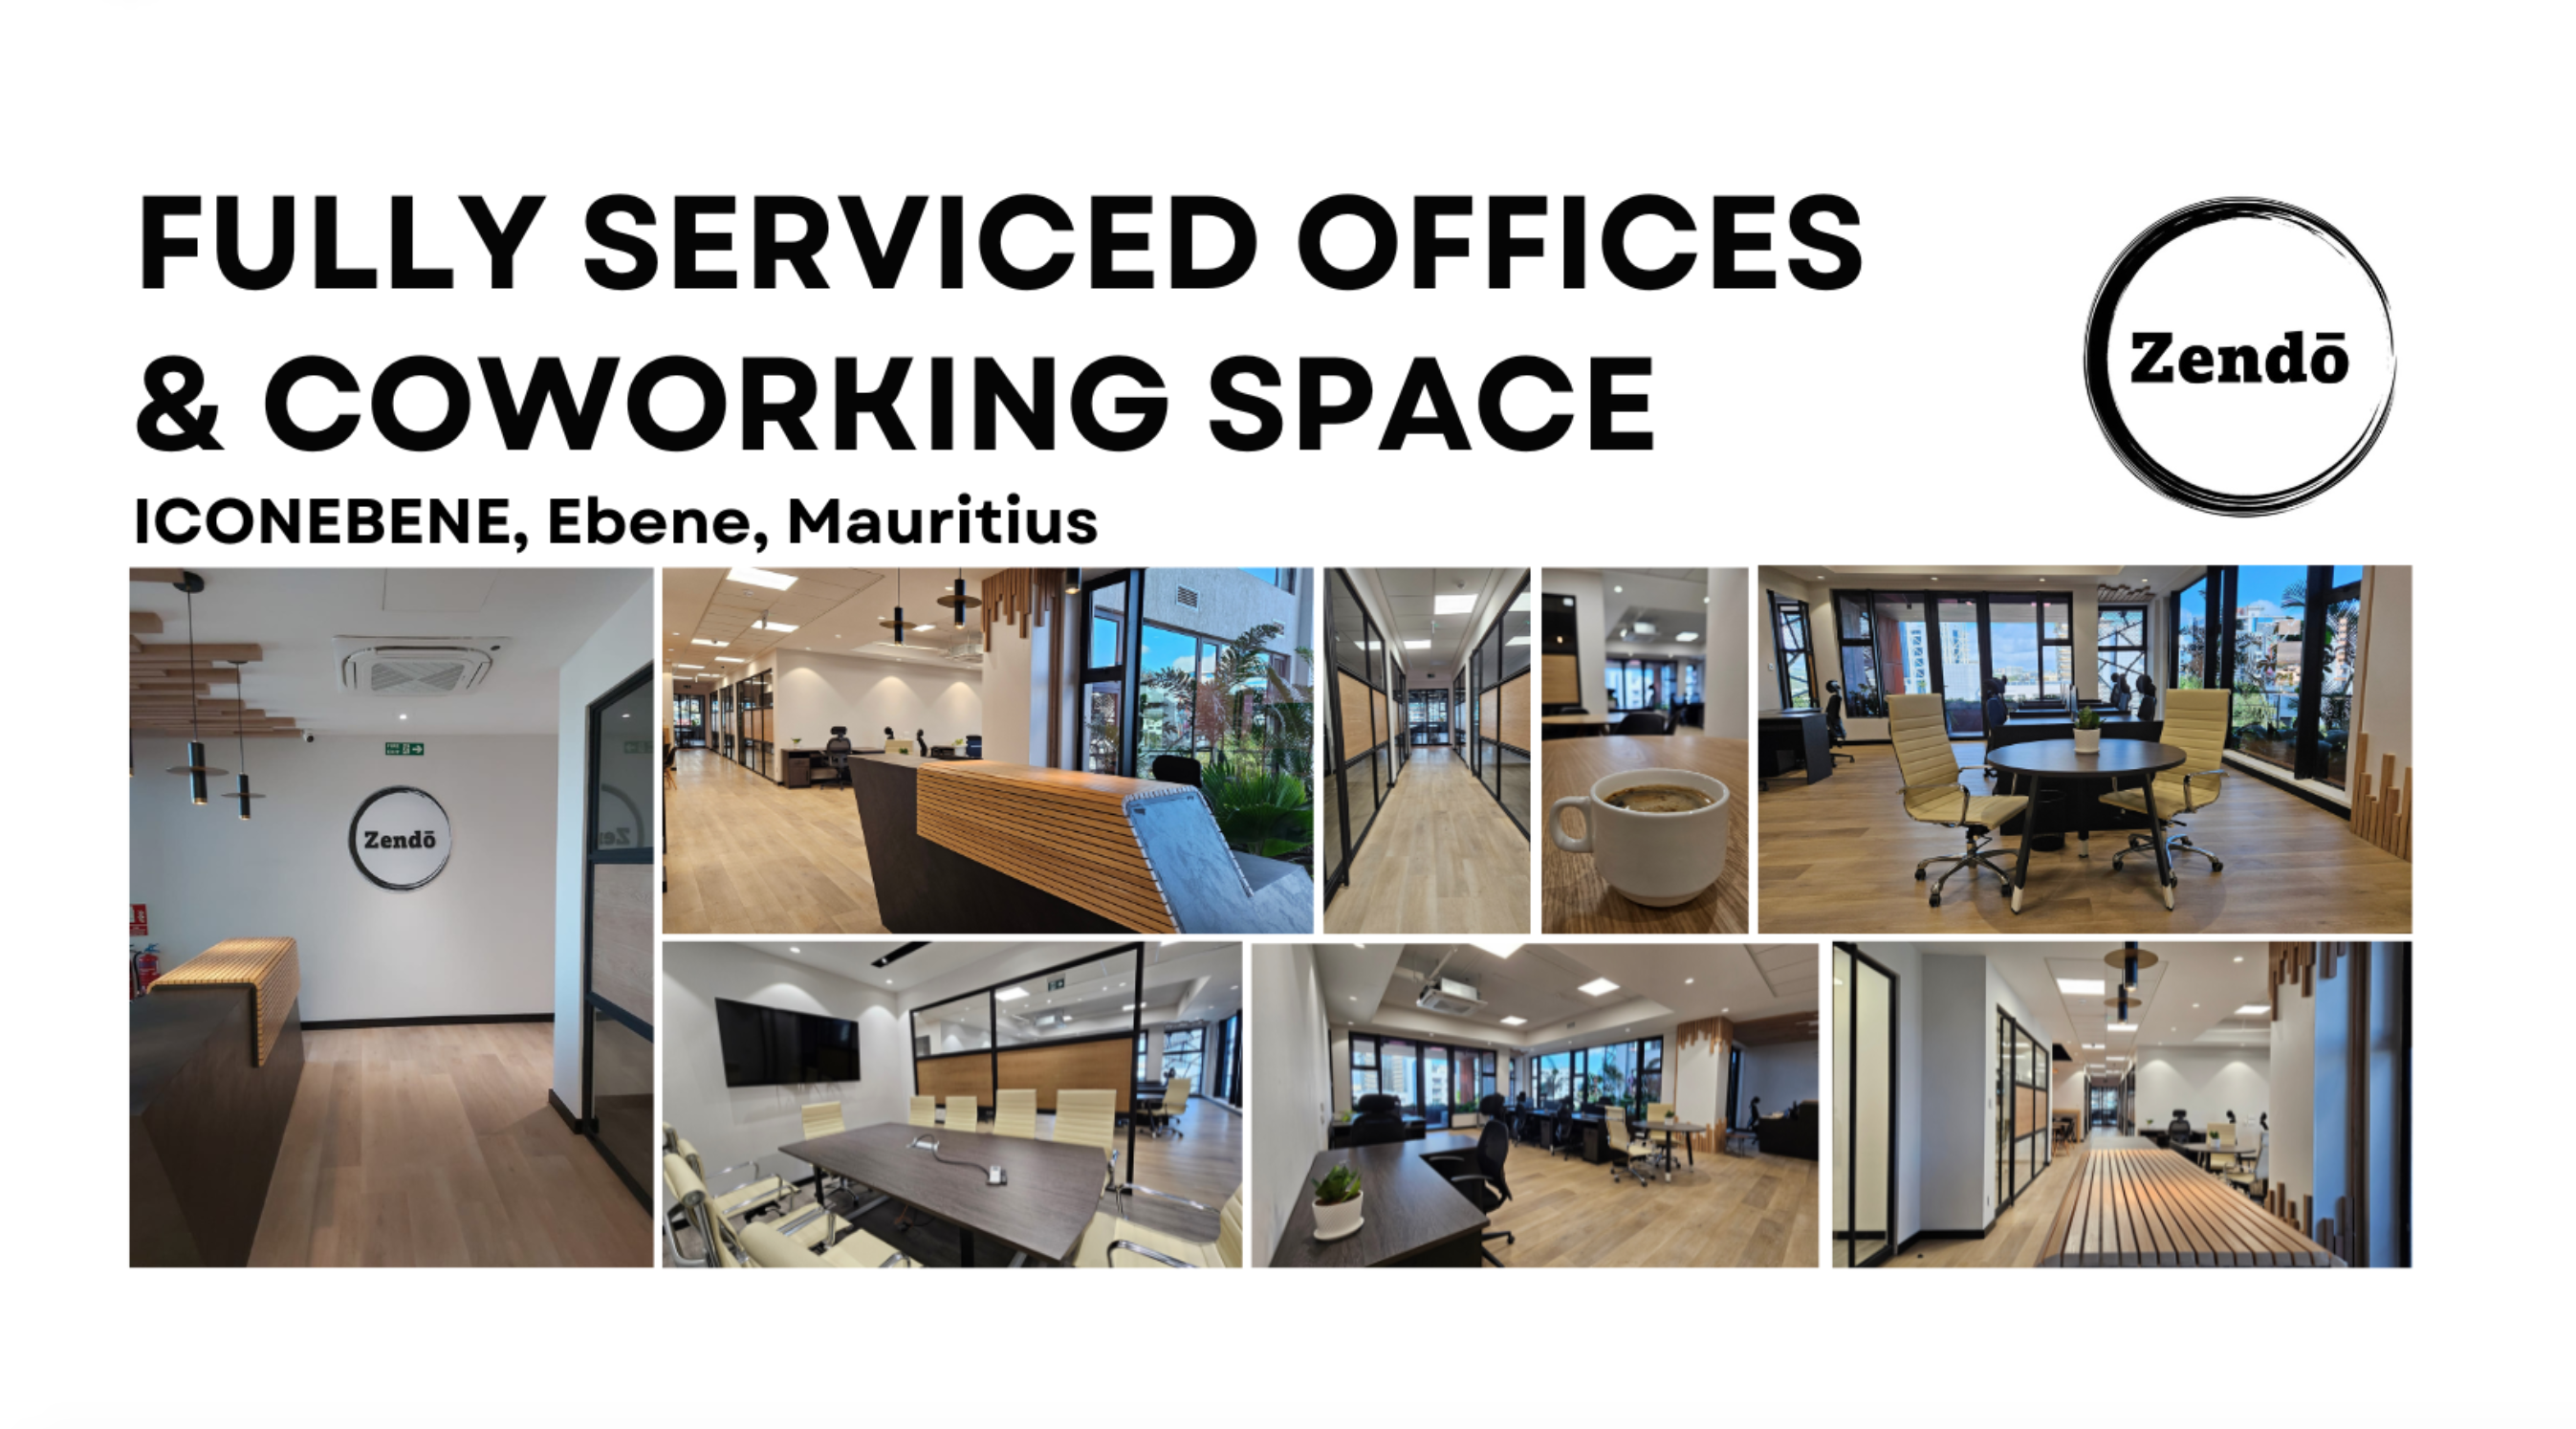 Zendo Co-working spcae, best Co-working space in Mauritius